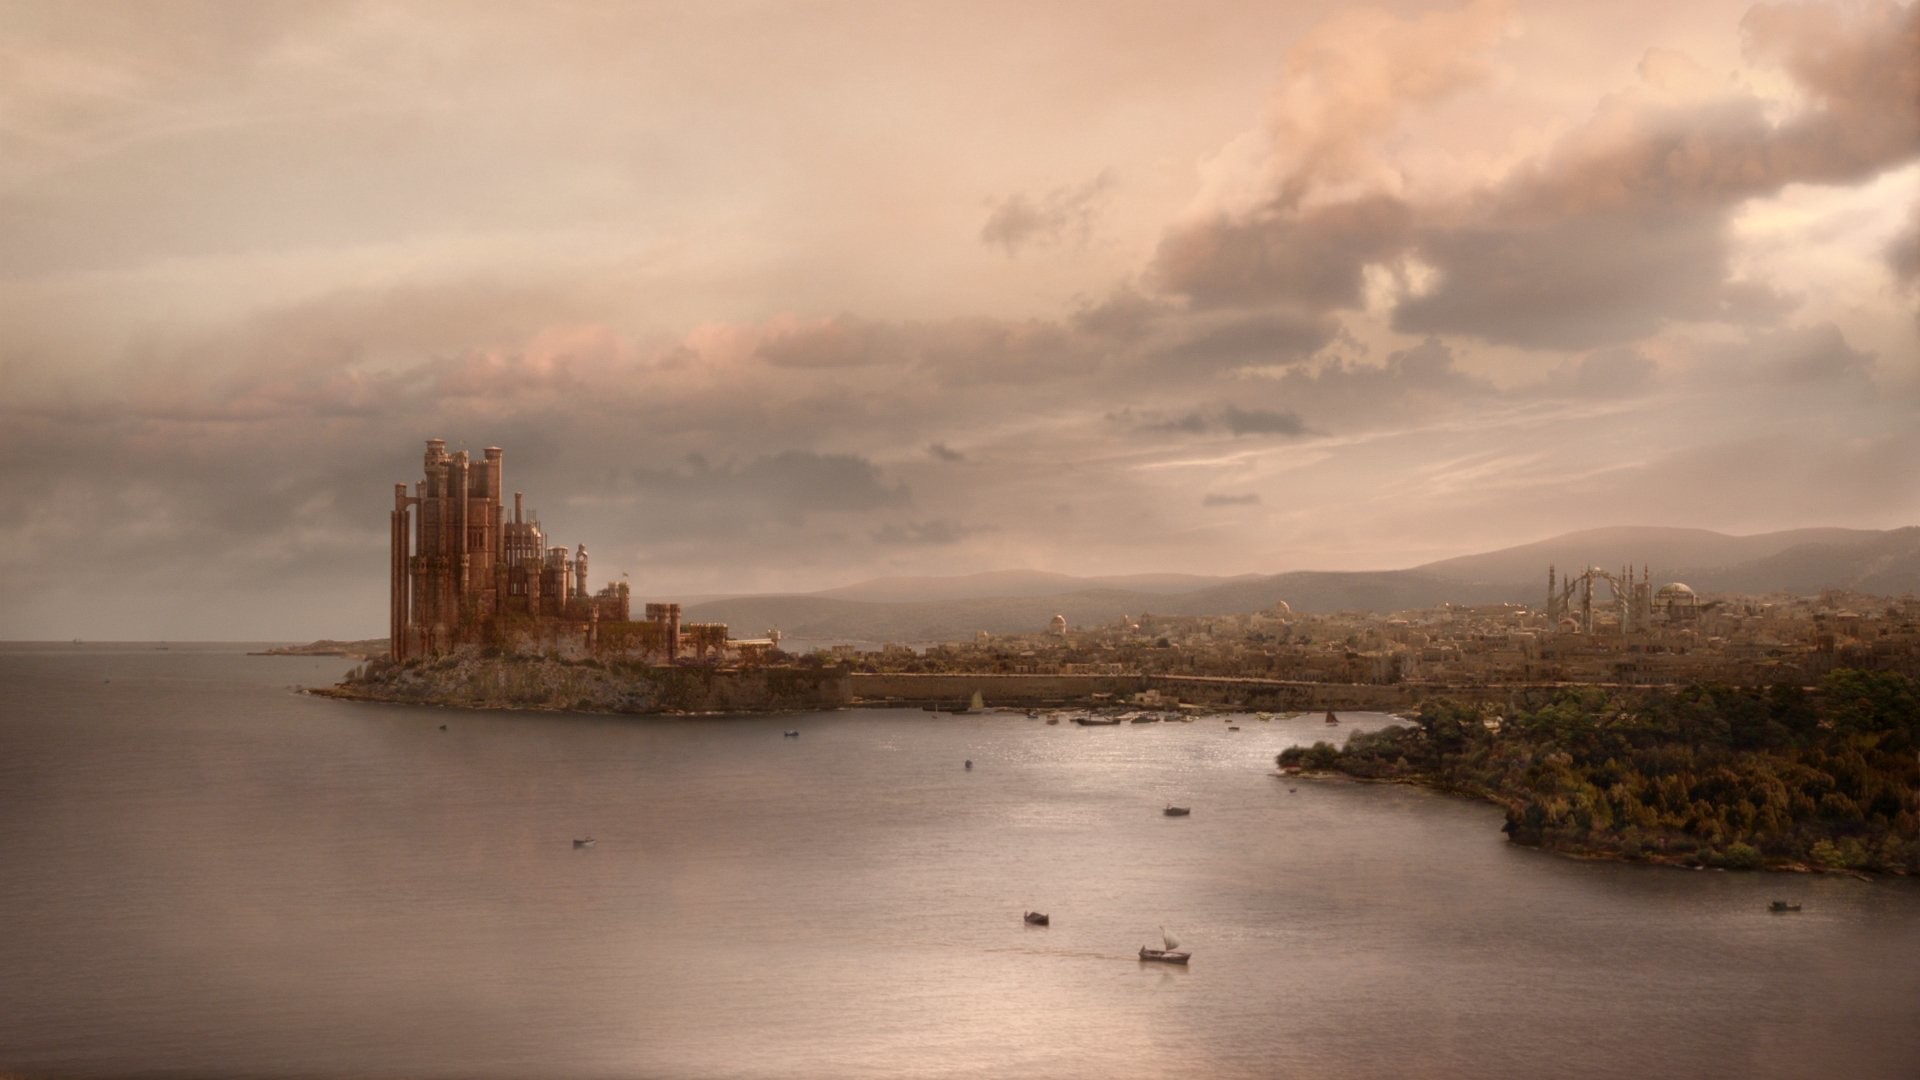 HD Game Of Thrones Wallpapers and Photos, px By Daisy Delcid